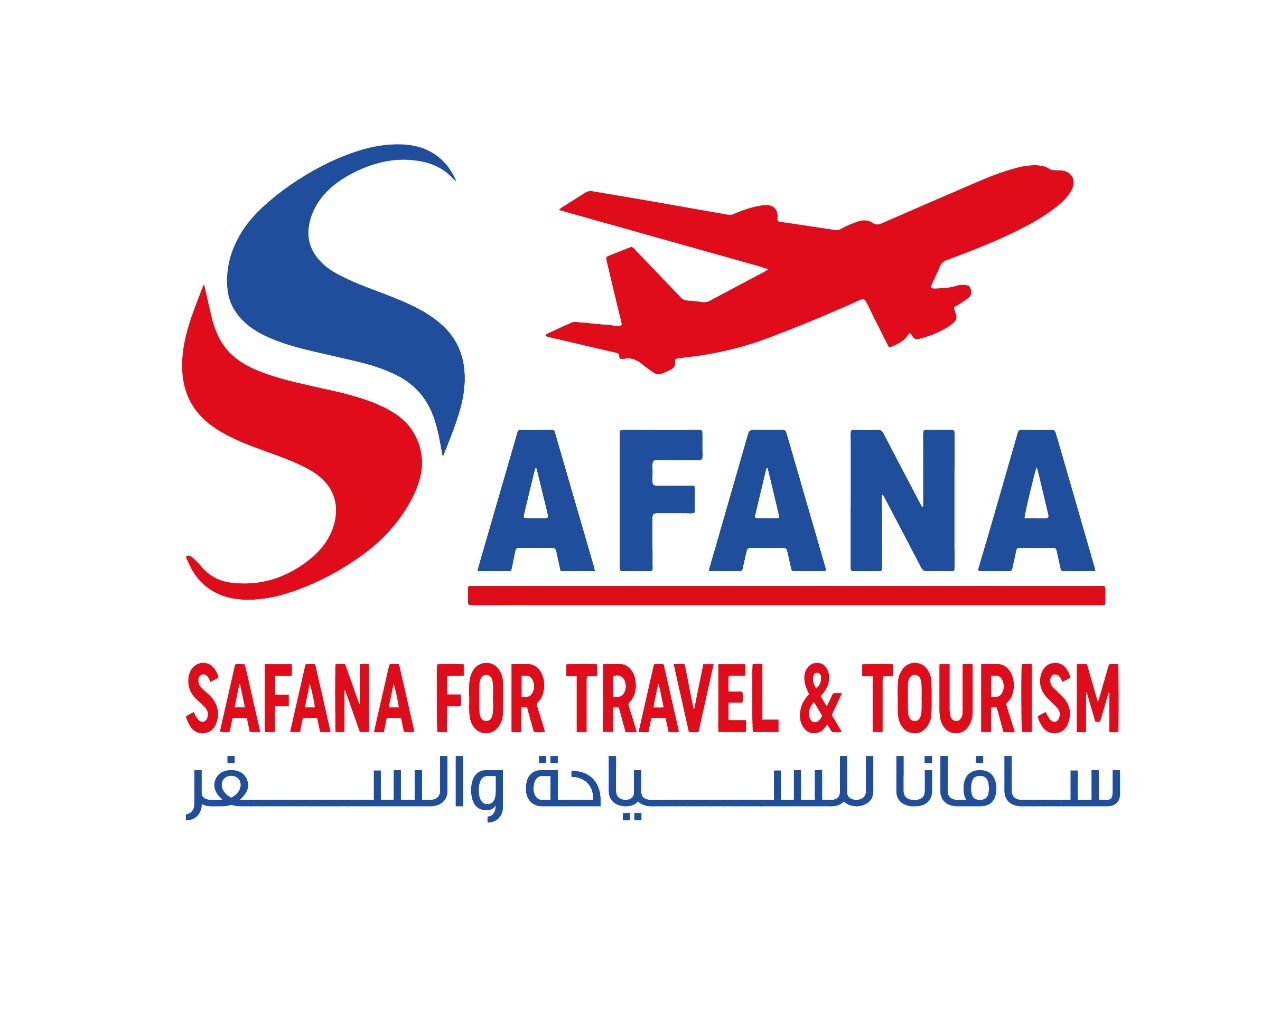 Welcome to Safana